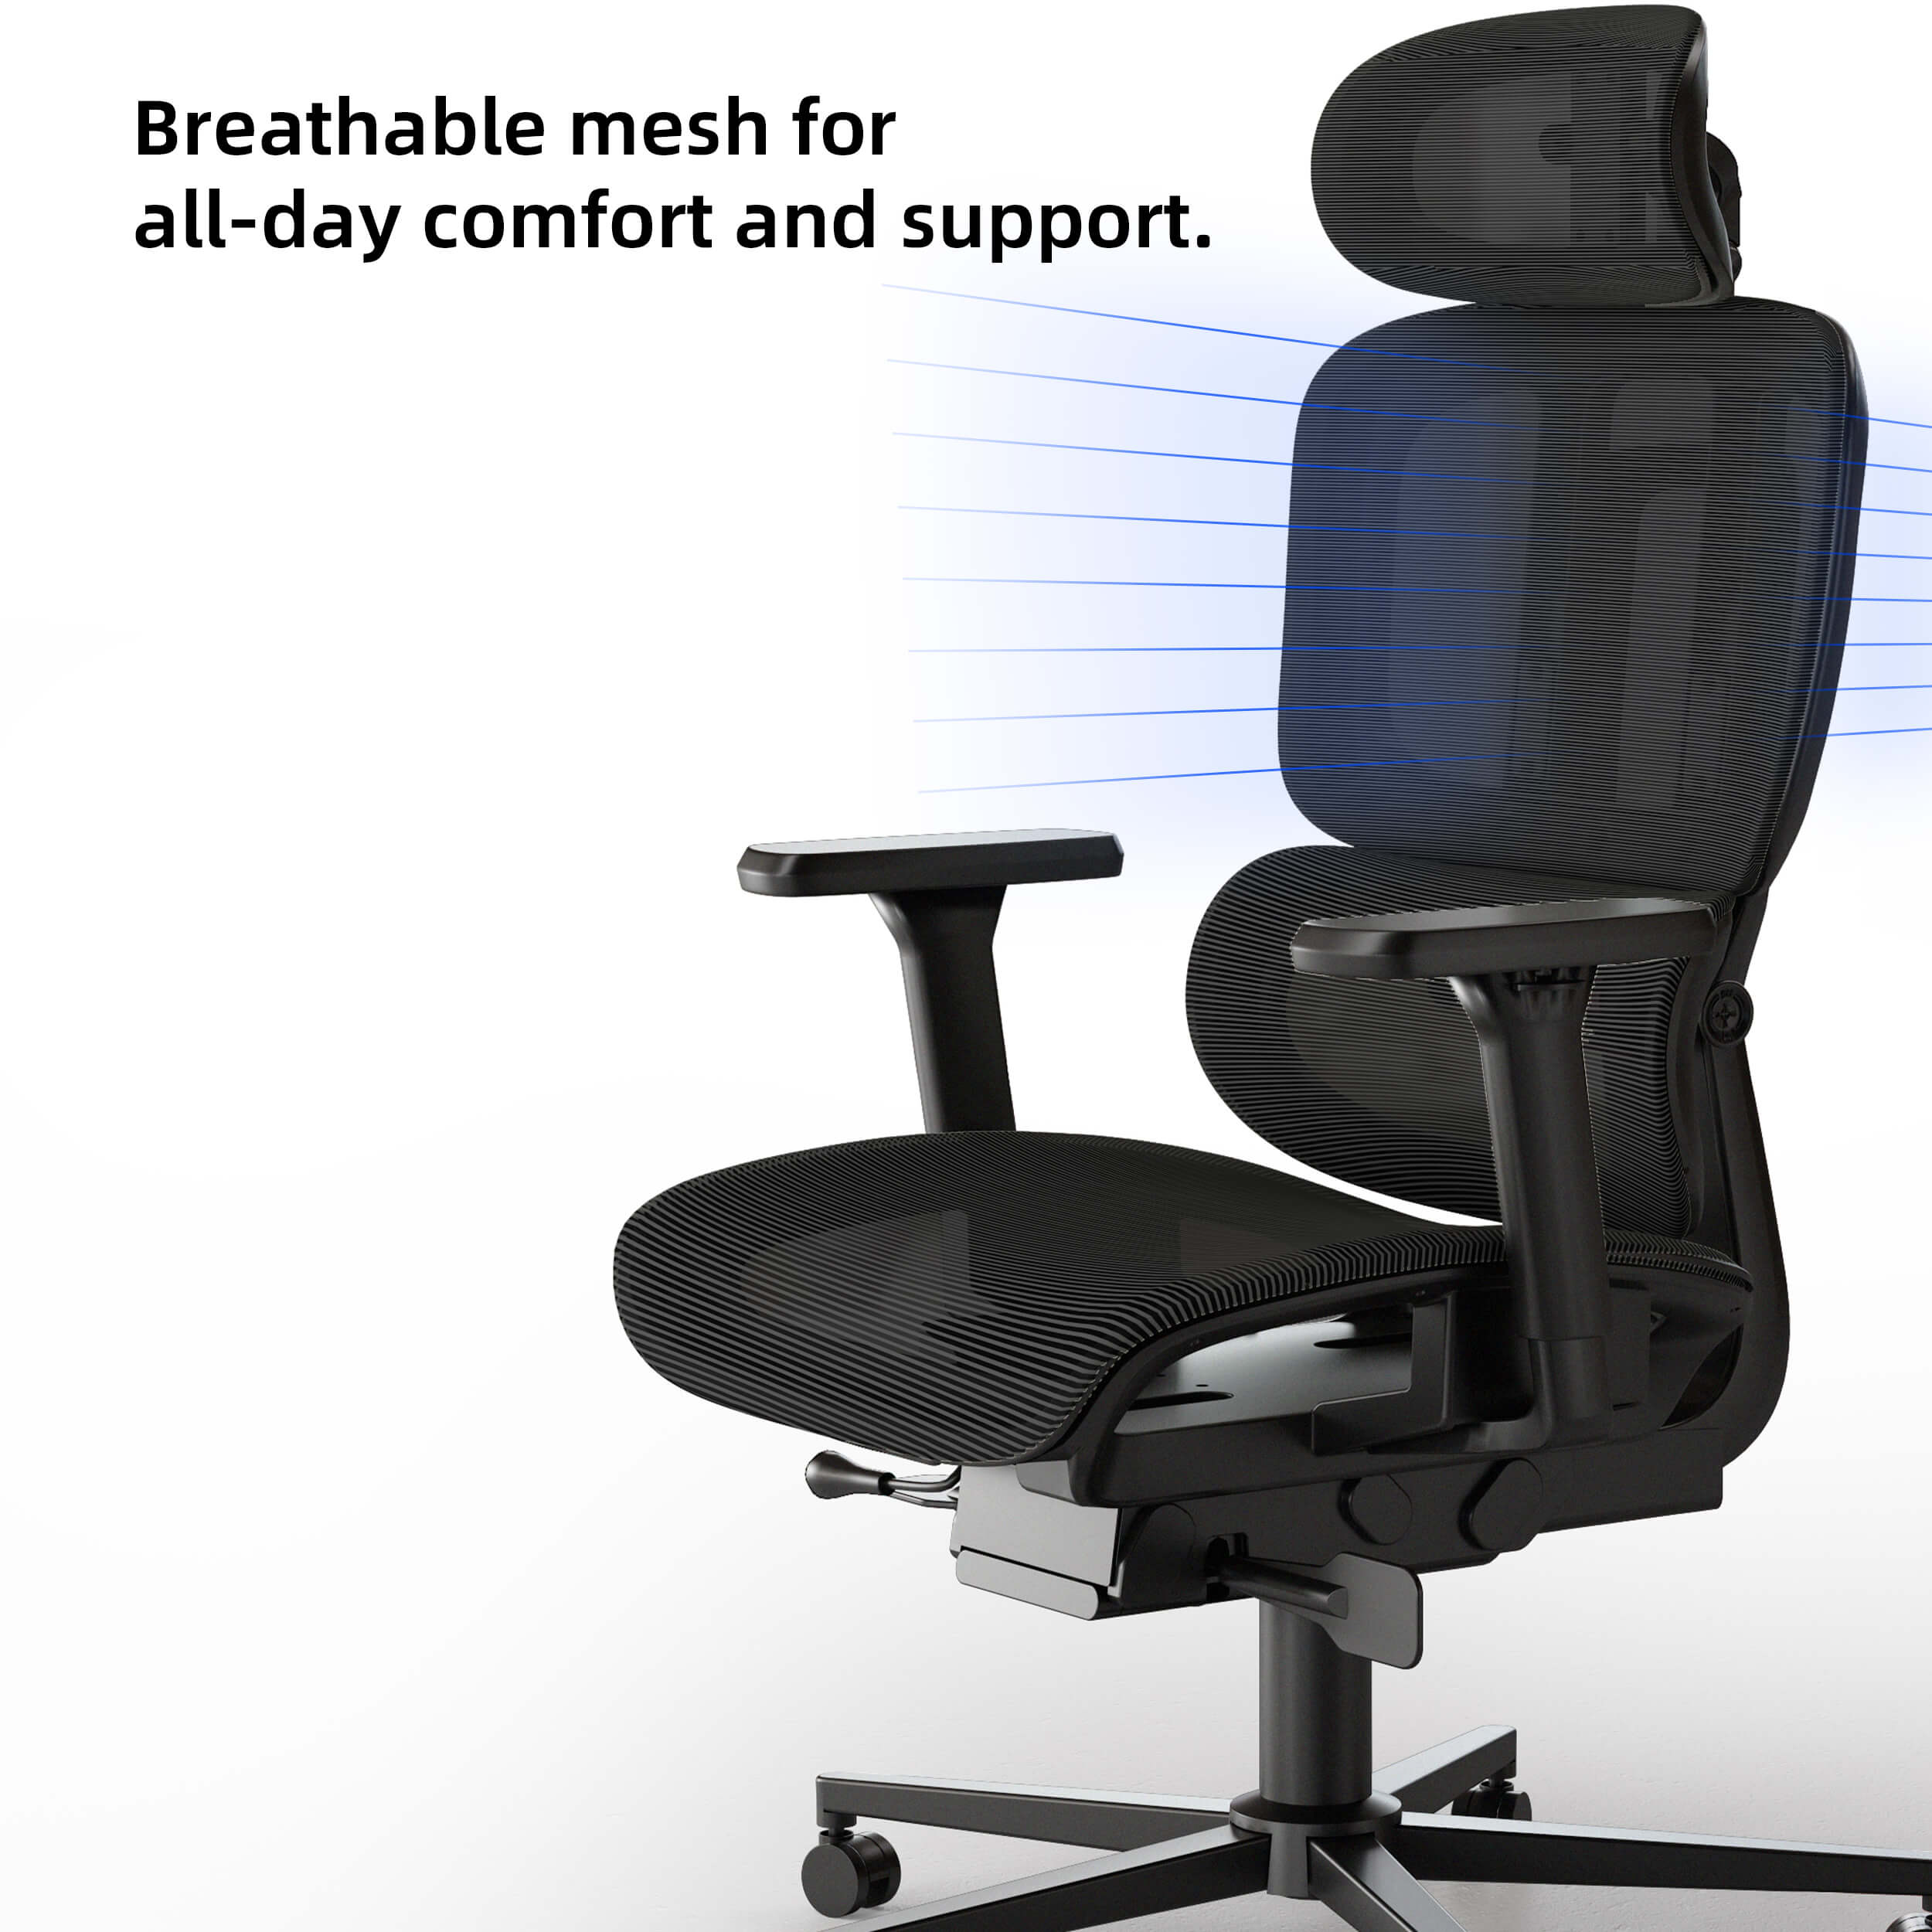 Maidesite black breathable mesh office chairs with back support for home office